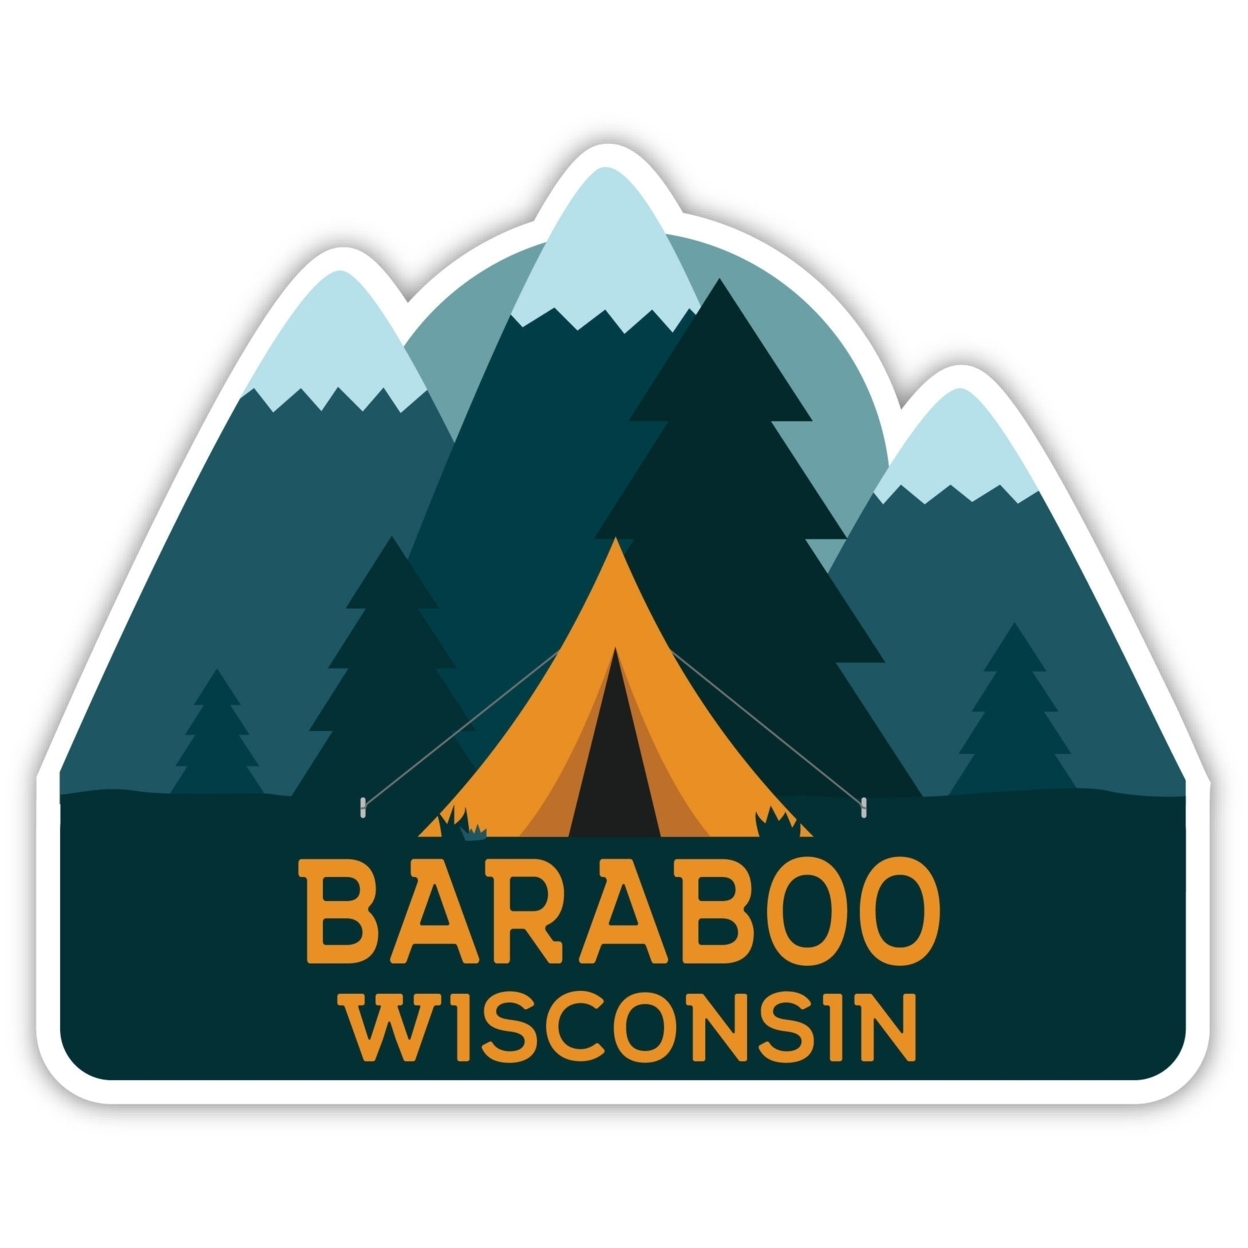 Baraboo Wisconsin Souvenir Decorative Stickers (Choose Theme And Size) - Single Unit, 12-Inch, Tent